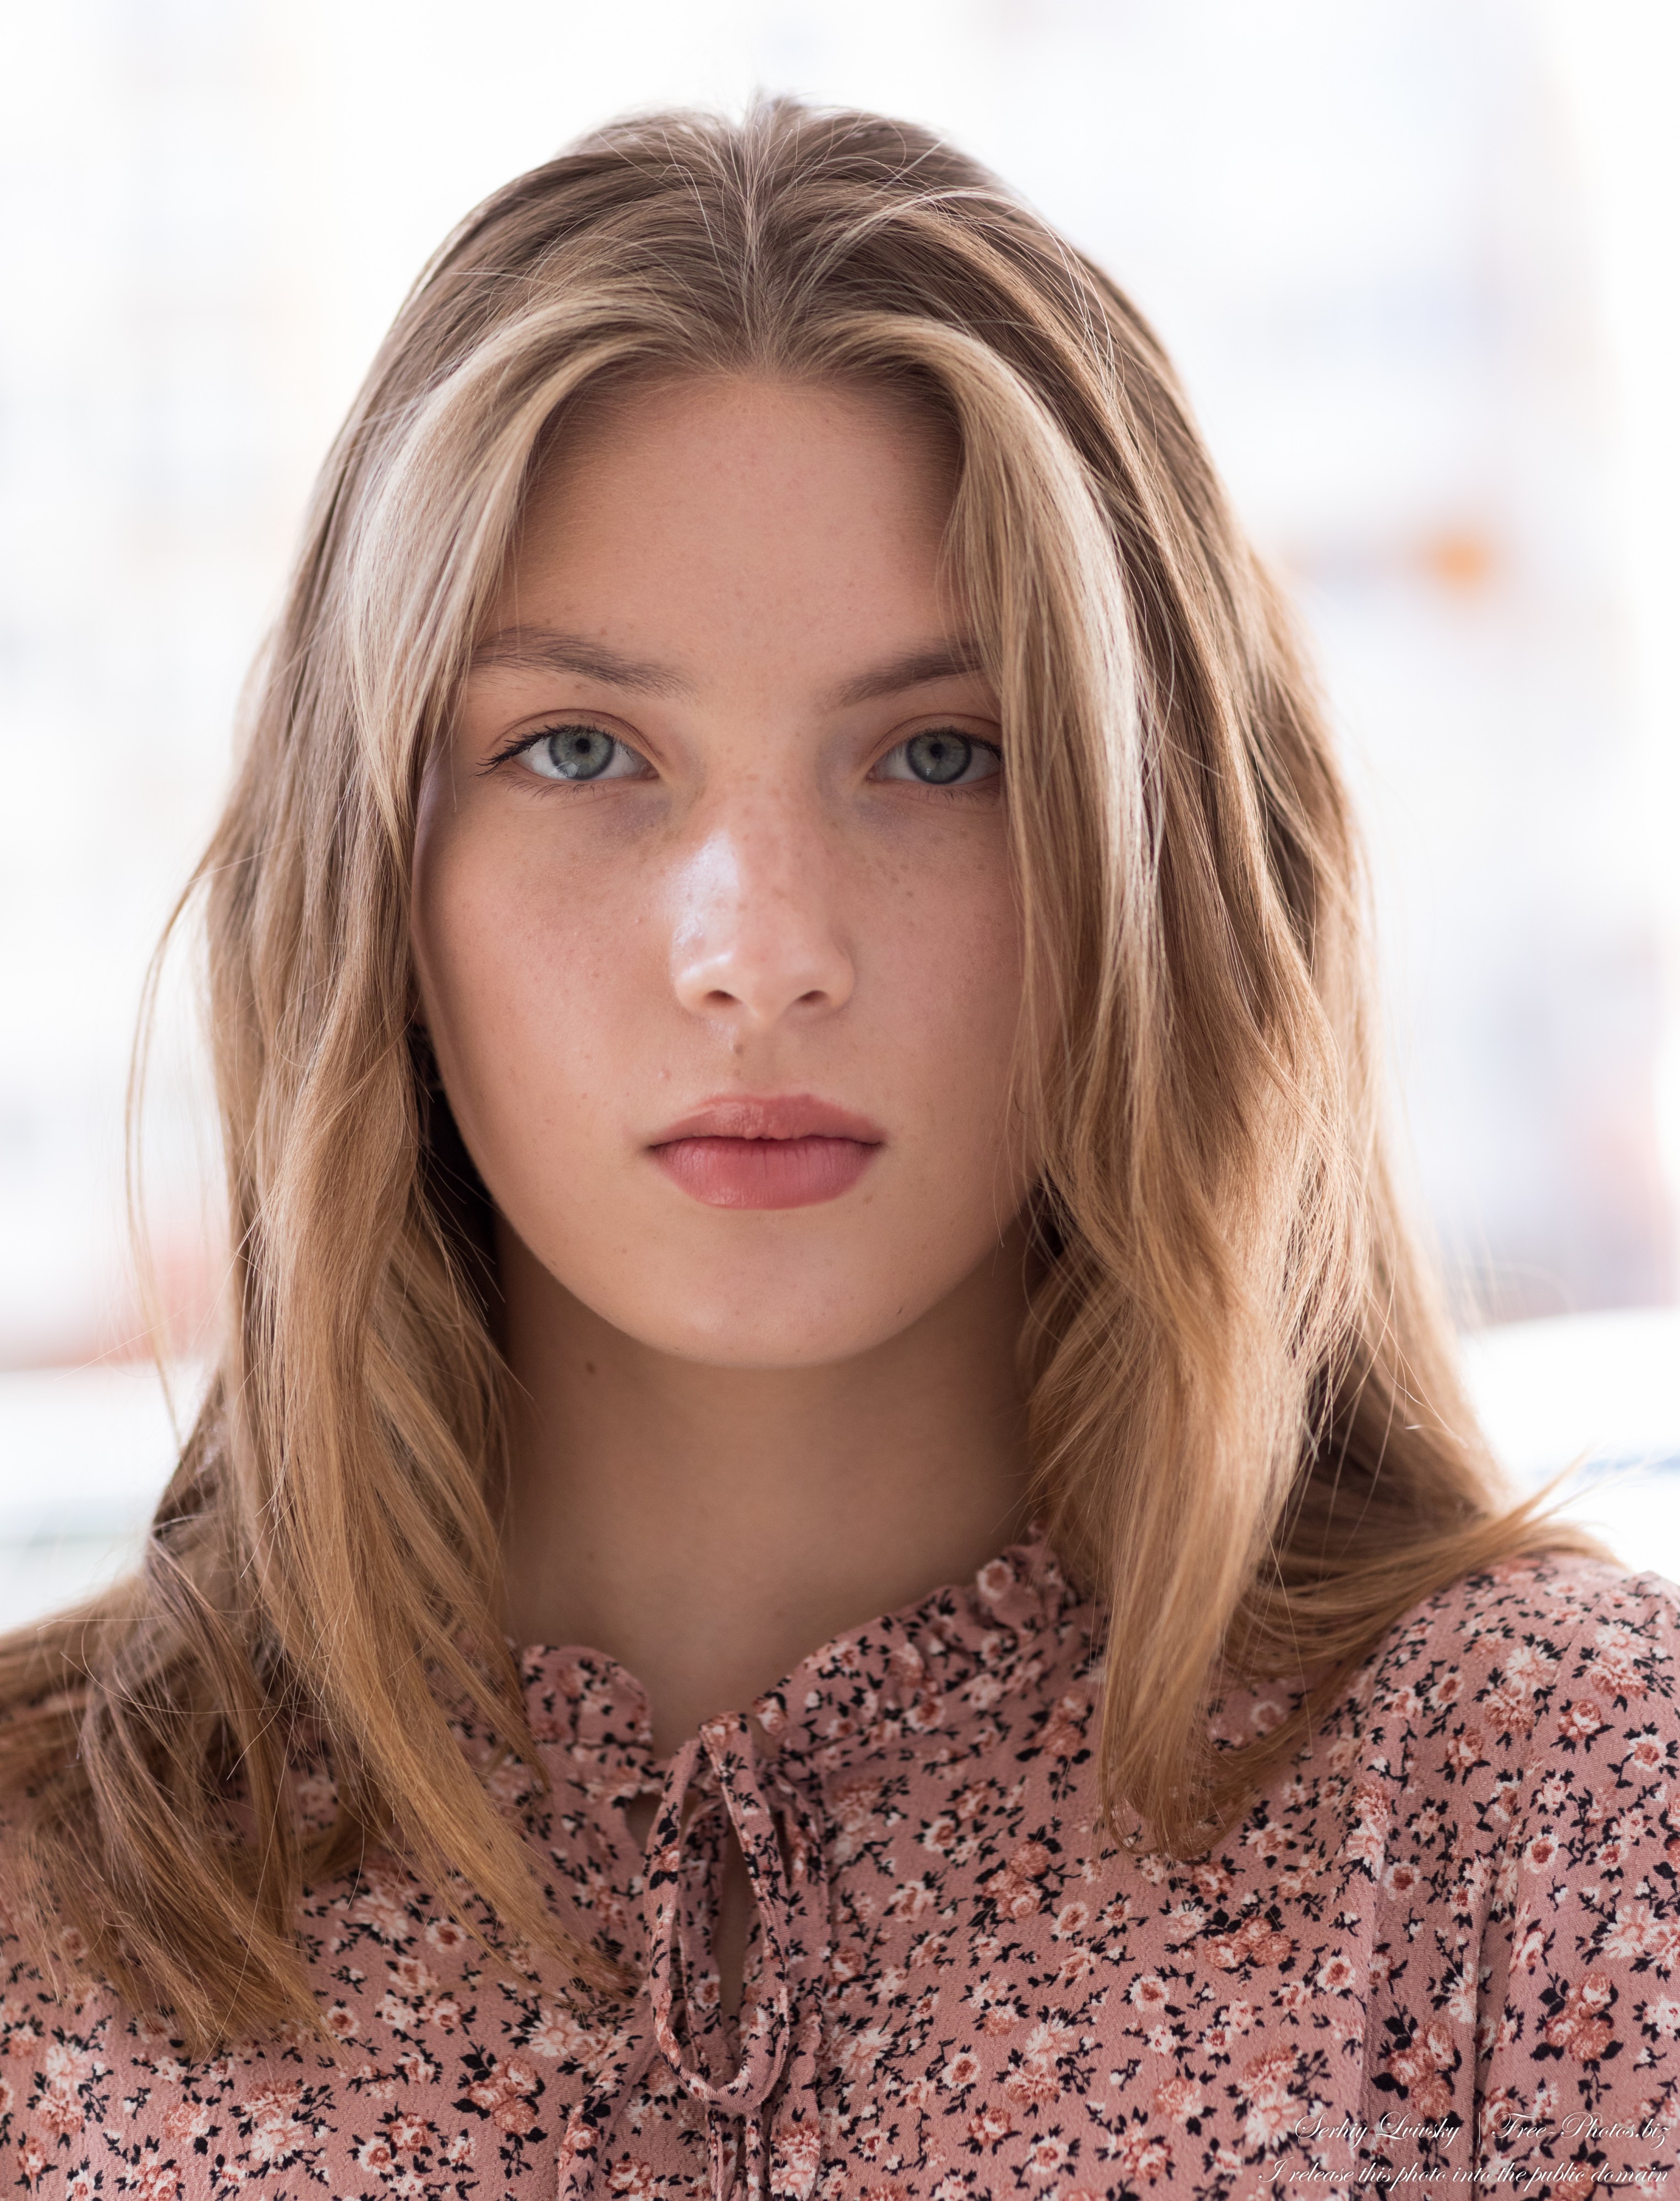 Sophia - a 17-year-old fair-haired girl photographed by Serhiy Lvivsky in September 2020, picture 18